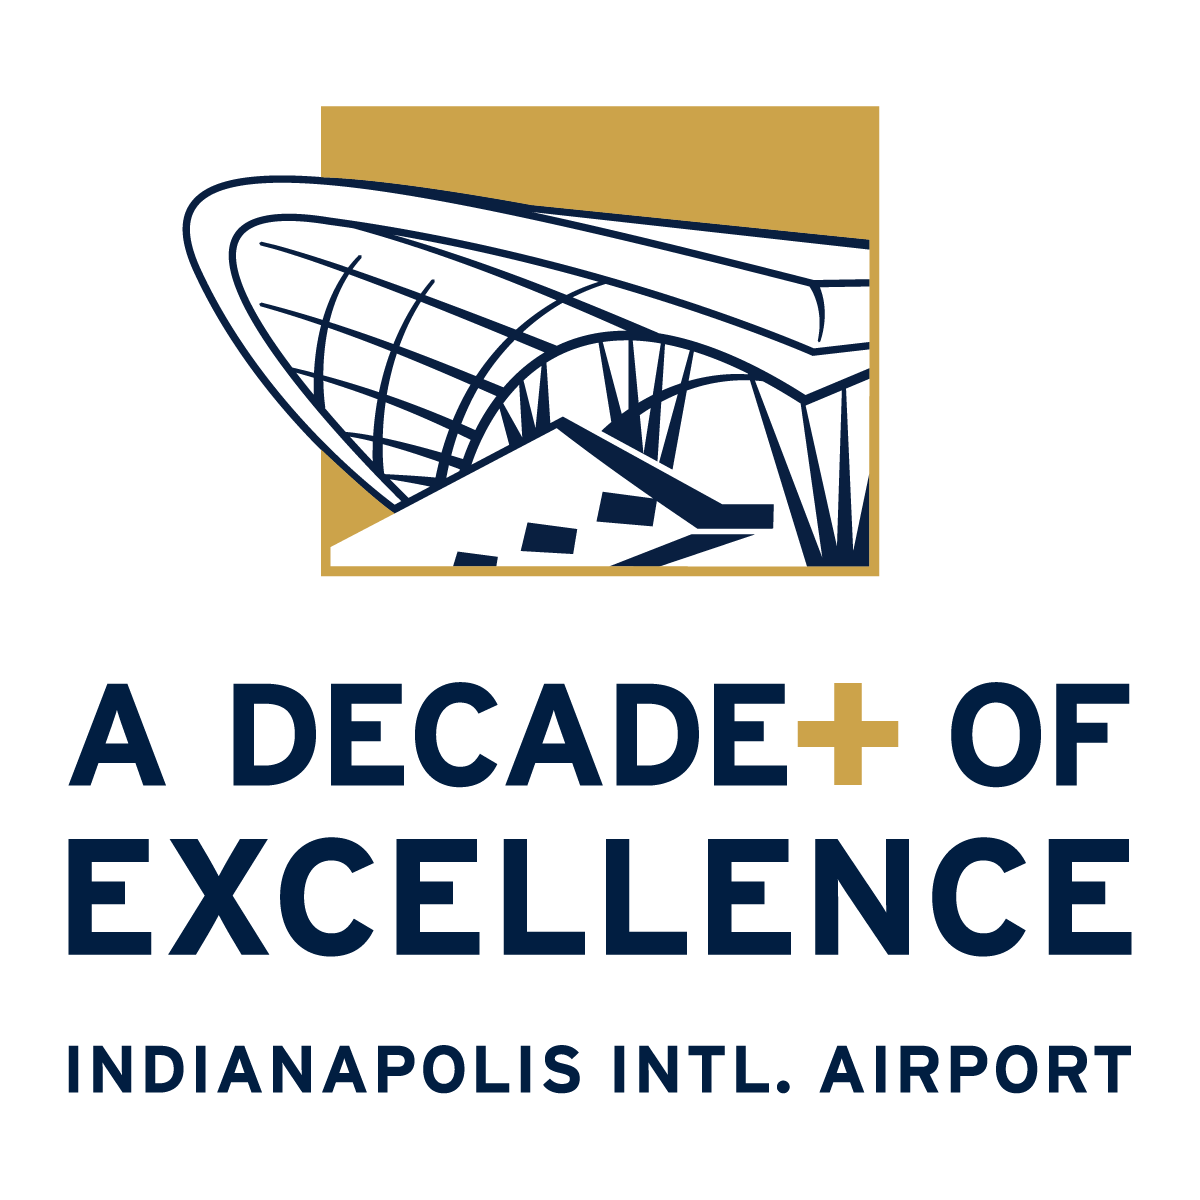 H. Indianapolis Airport Authority (Tier 3)